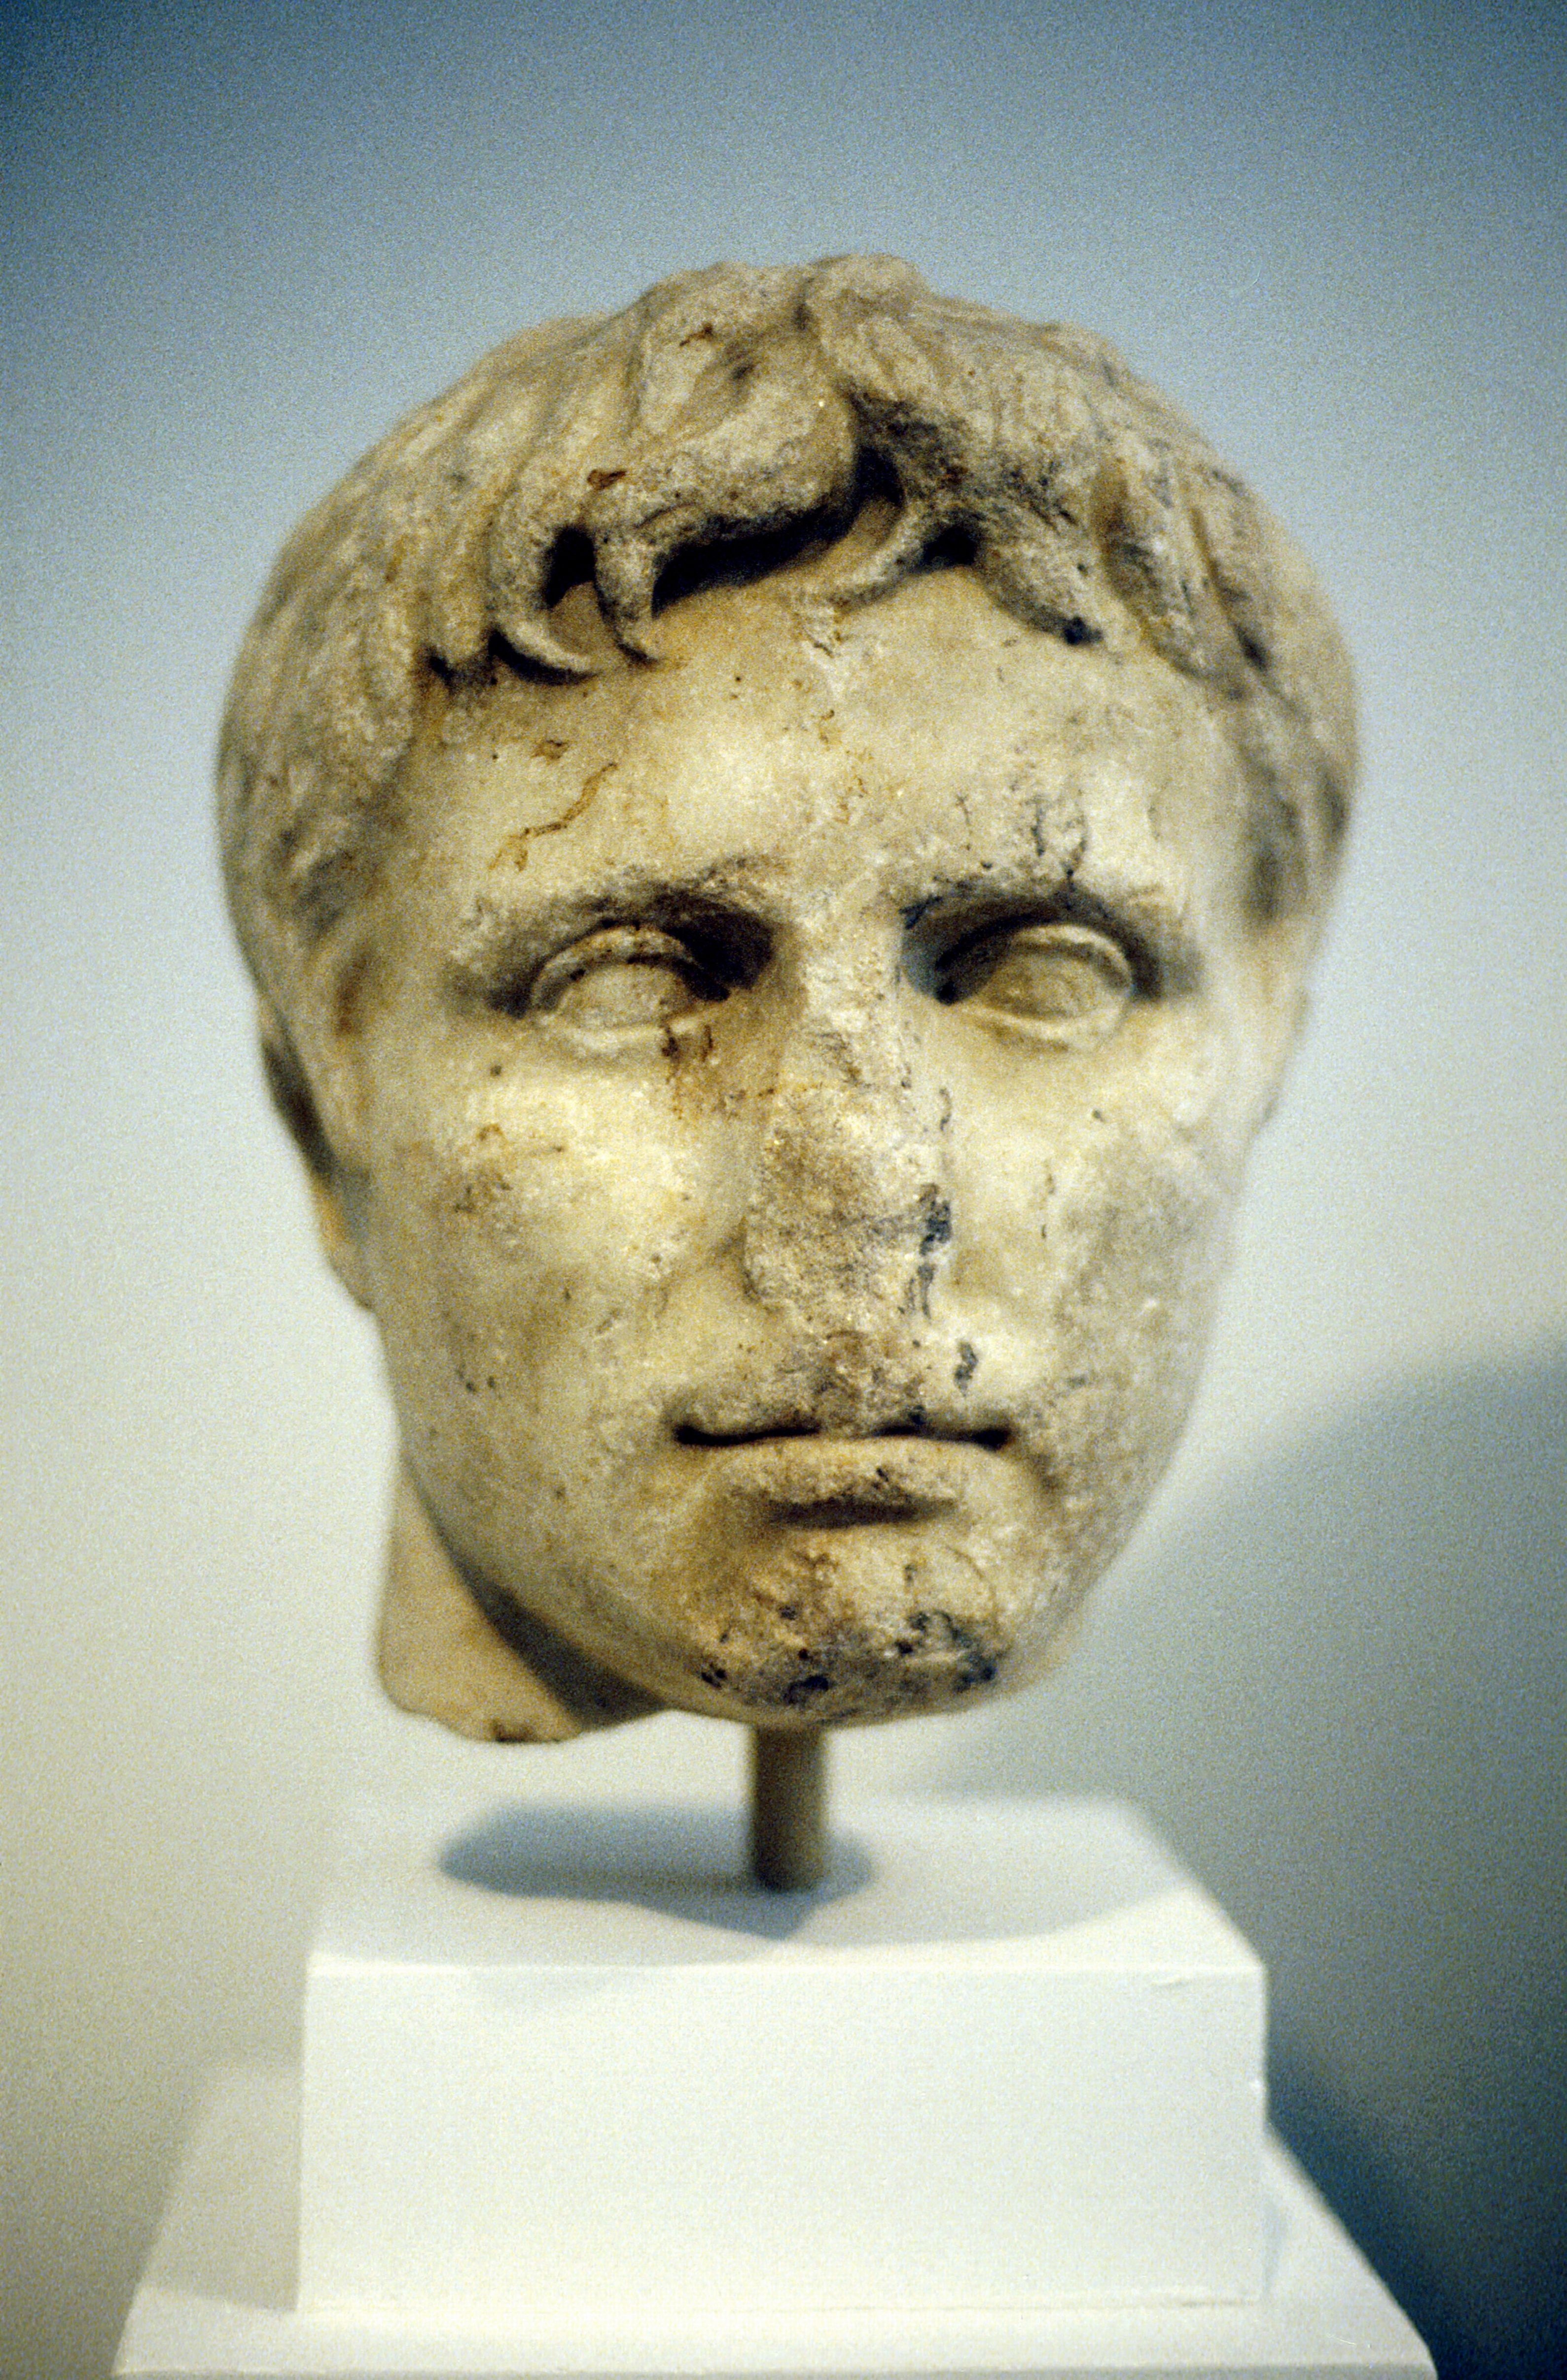 Marble head with a missing nose